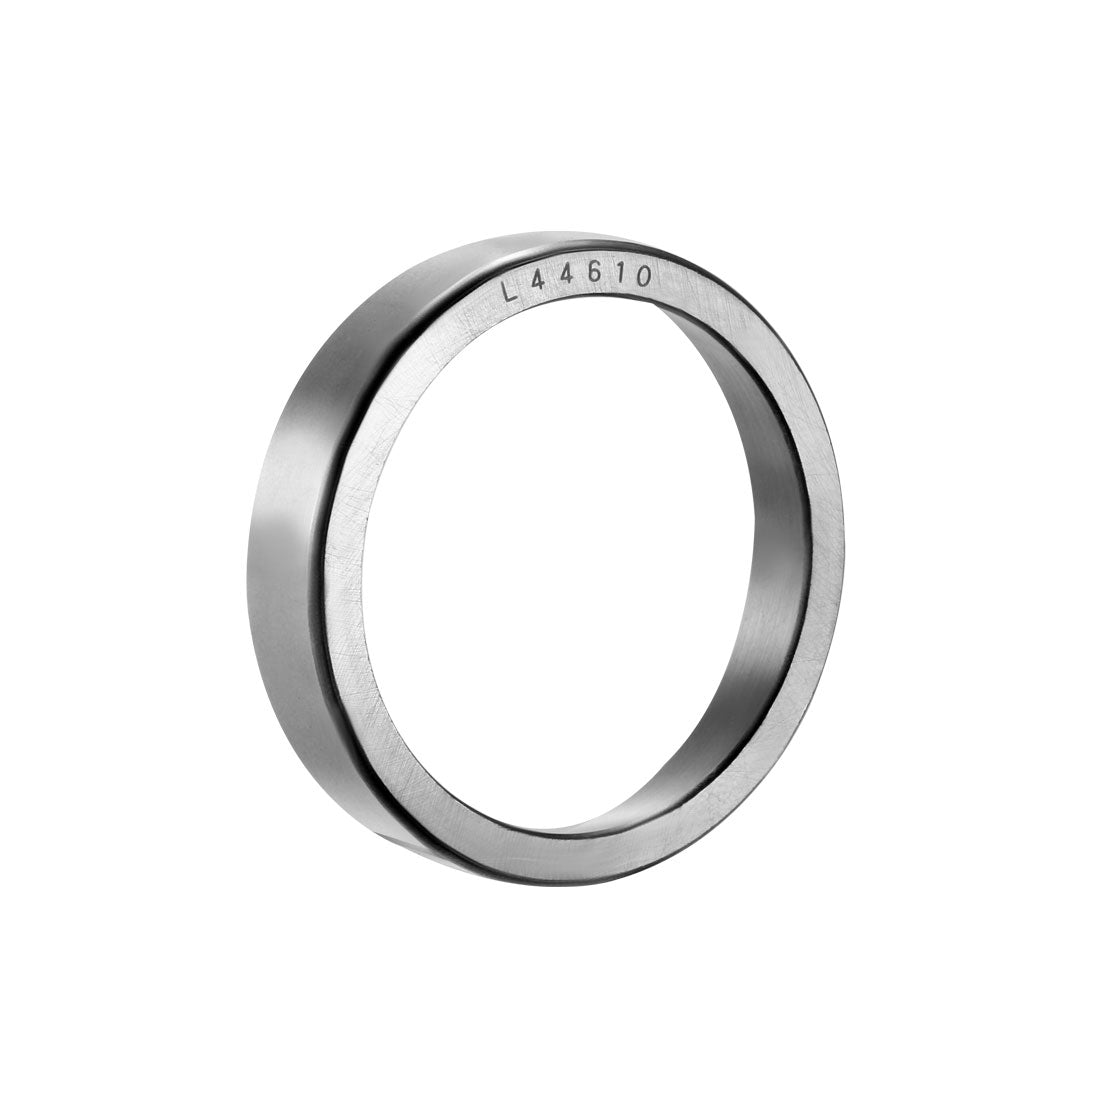 Uxcell Uxcell L44610 Tapered Roller Bearing Outer Race Cup 1.98" Outside Diameter, 0.42" Width